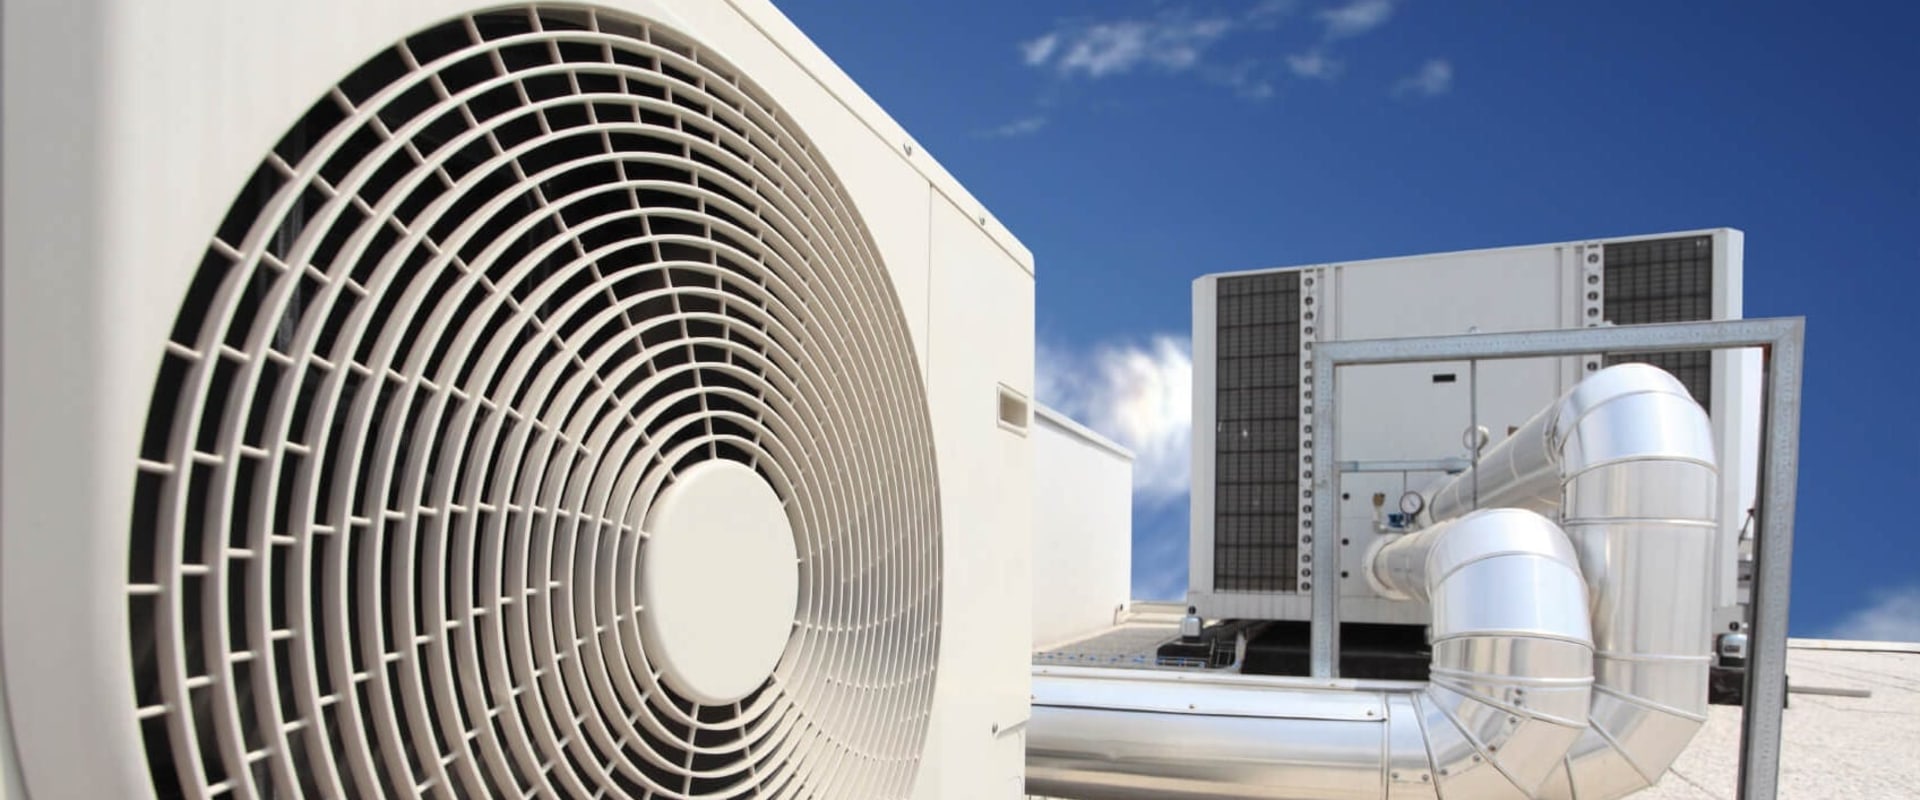 The Benefits of Installing an Ionizing Air Purifier in Deerfield Beach and Pompano Beach, FL